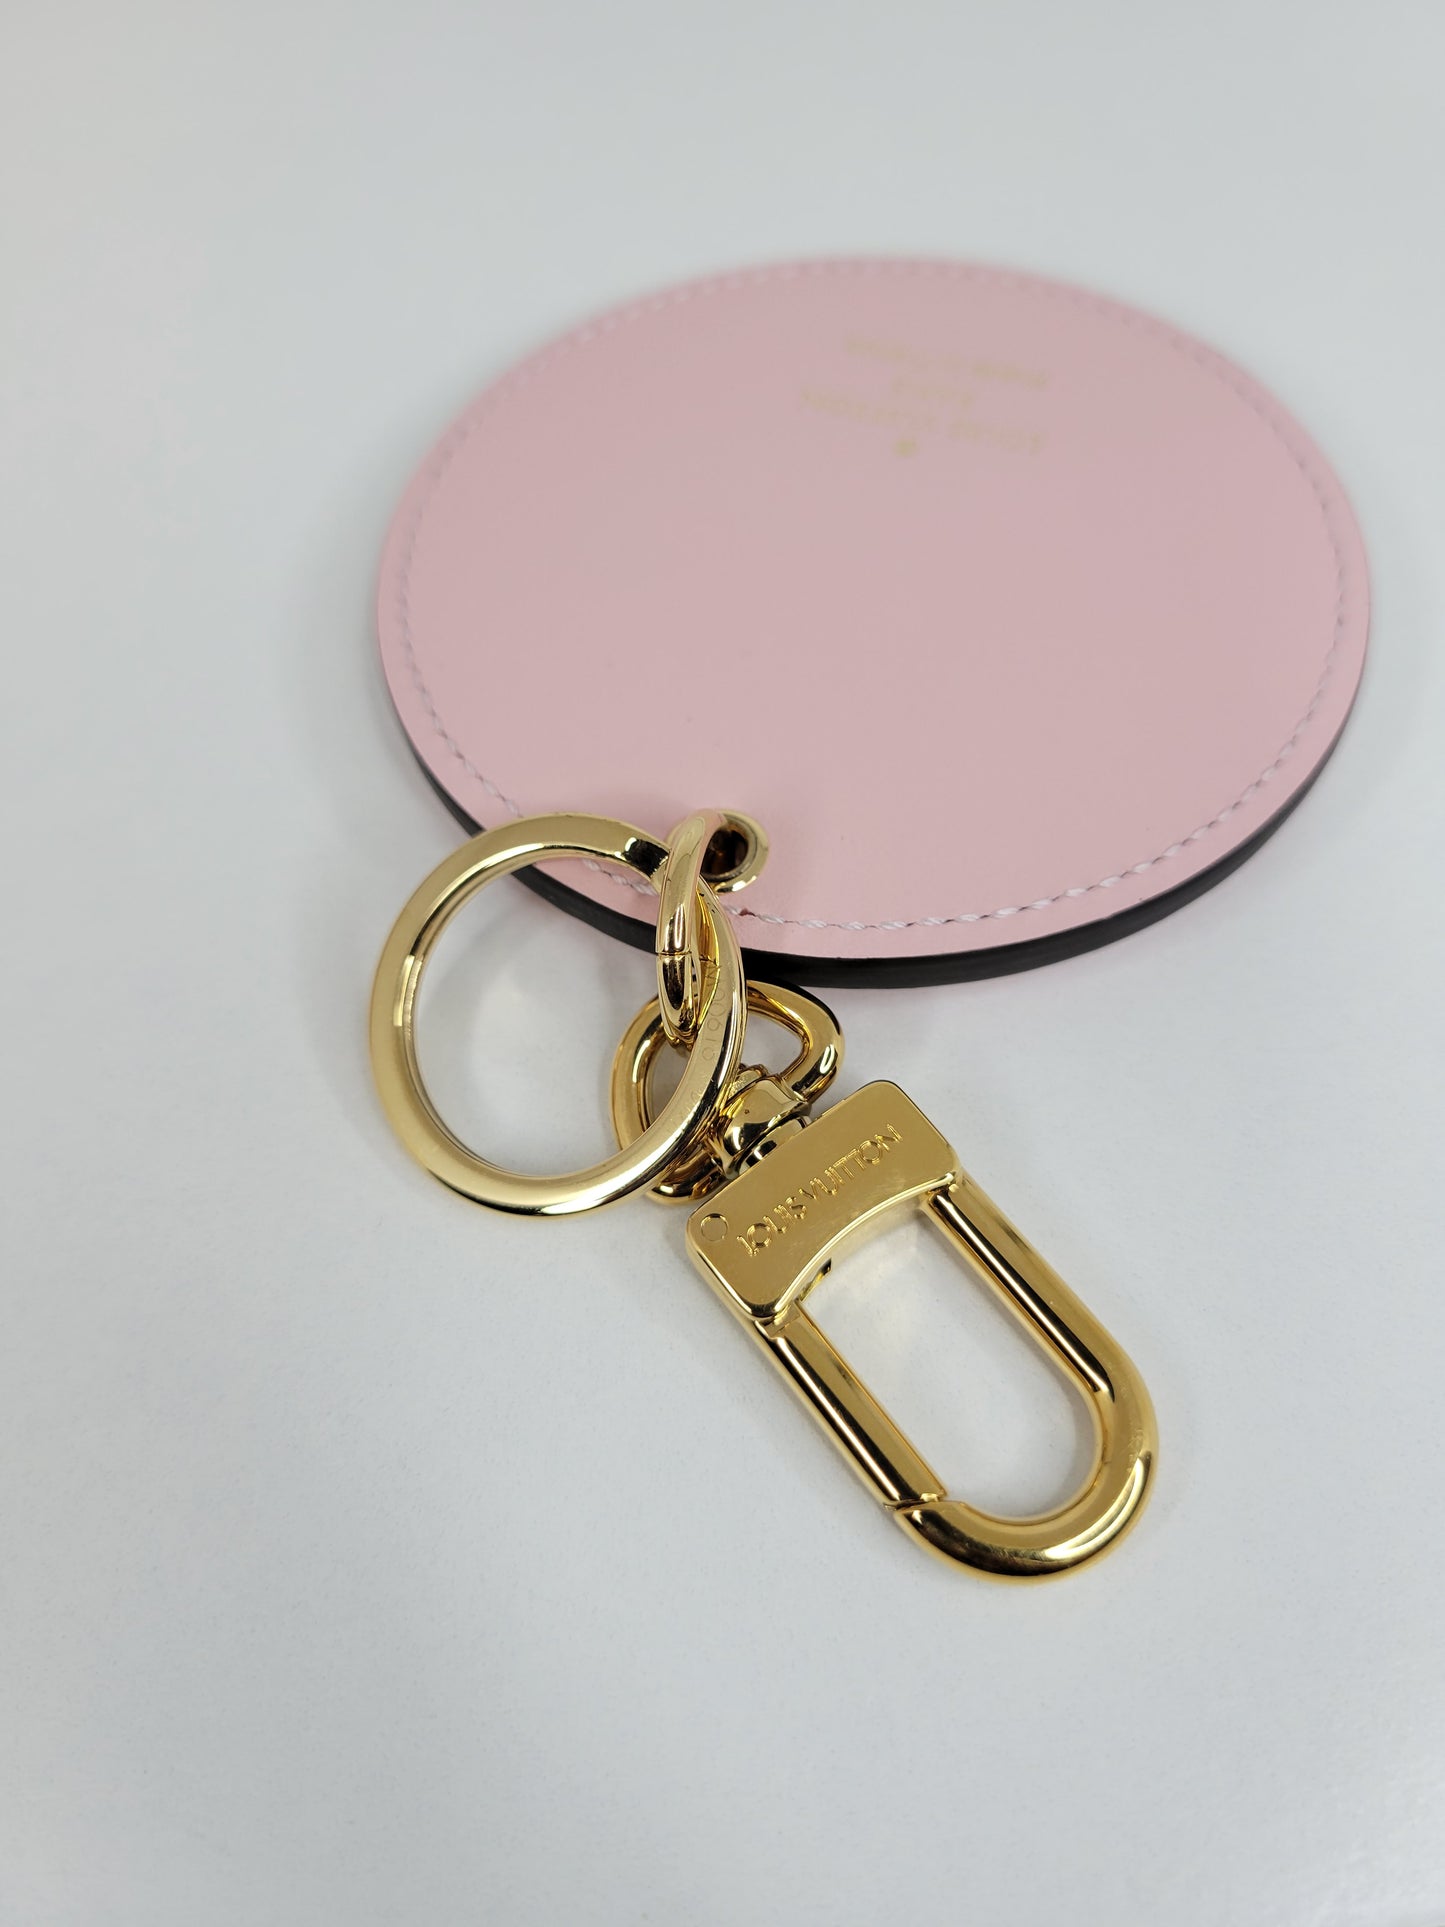 Louis Vuitton Limited Edition Valentines Day logo pink bag charm key holder